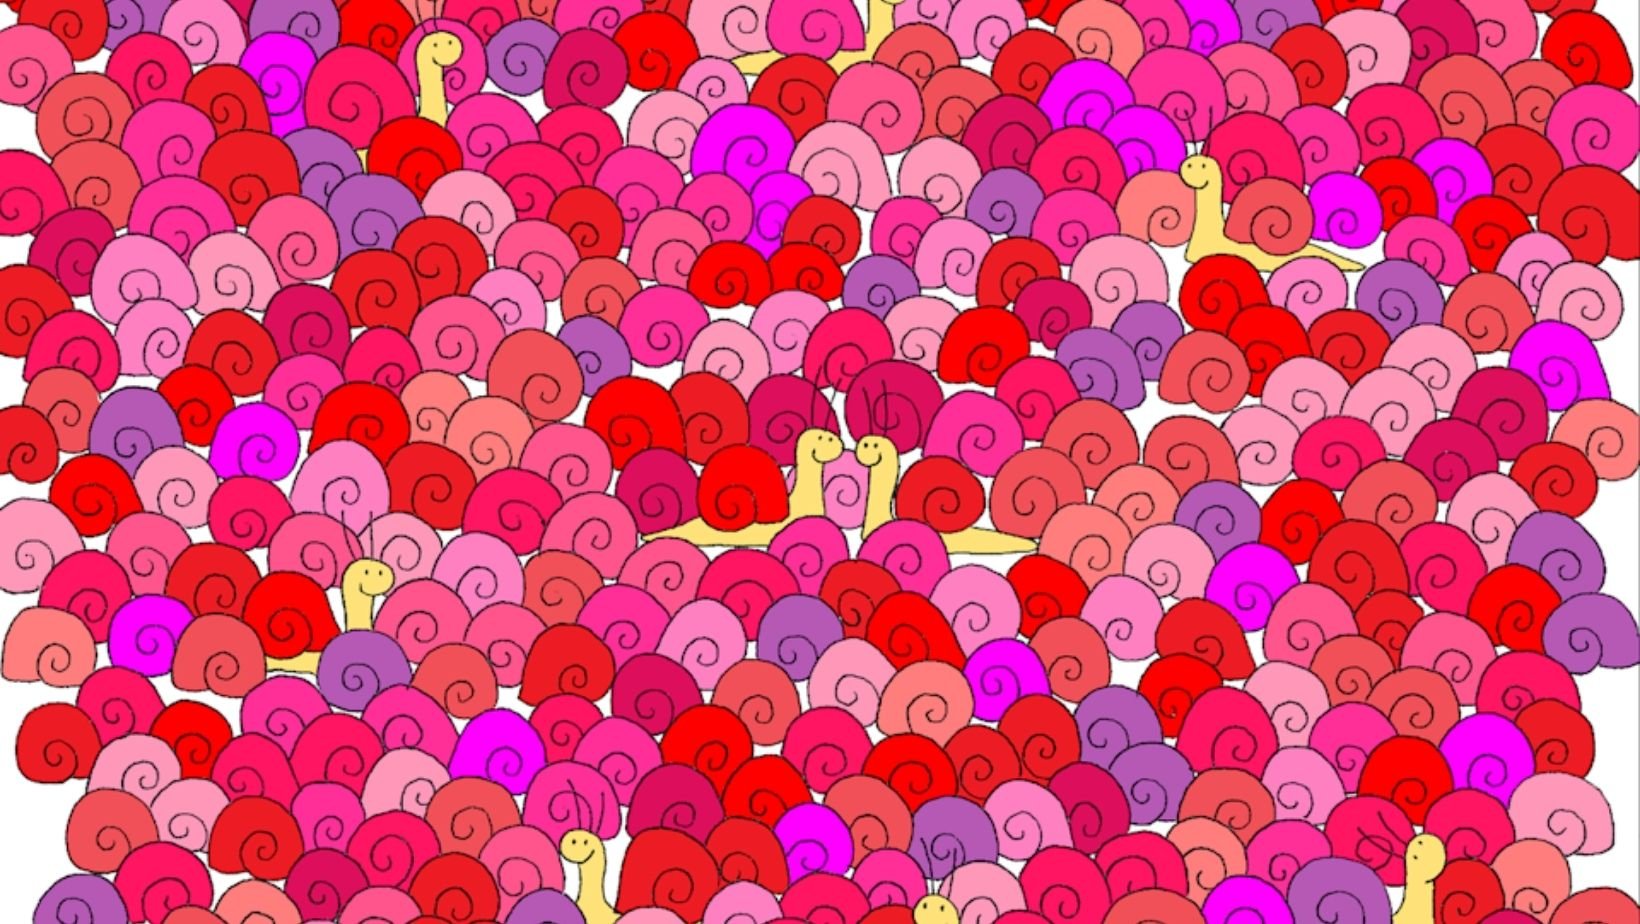 small joys thumbnail 16.jpg?resize=1200,630 - Can You Spot The Hidden ‘HEART’ Among The Colorful Snails?